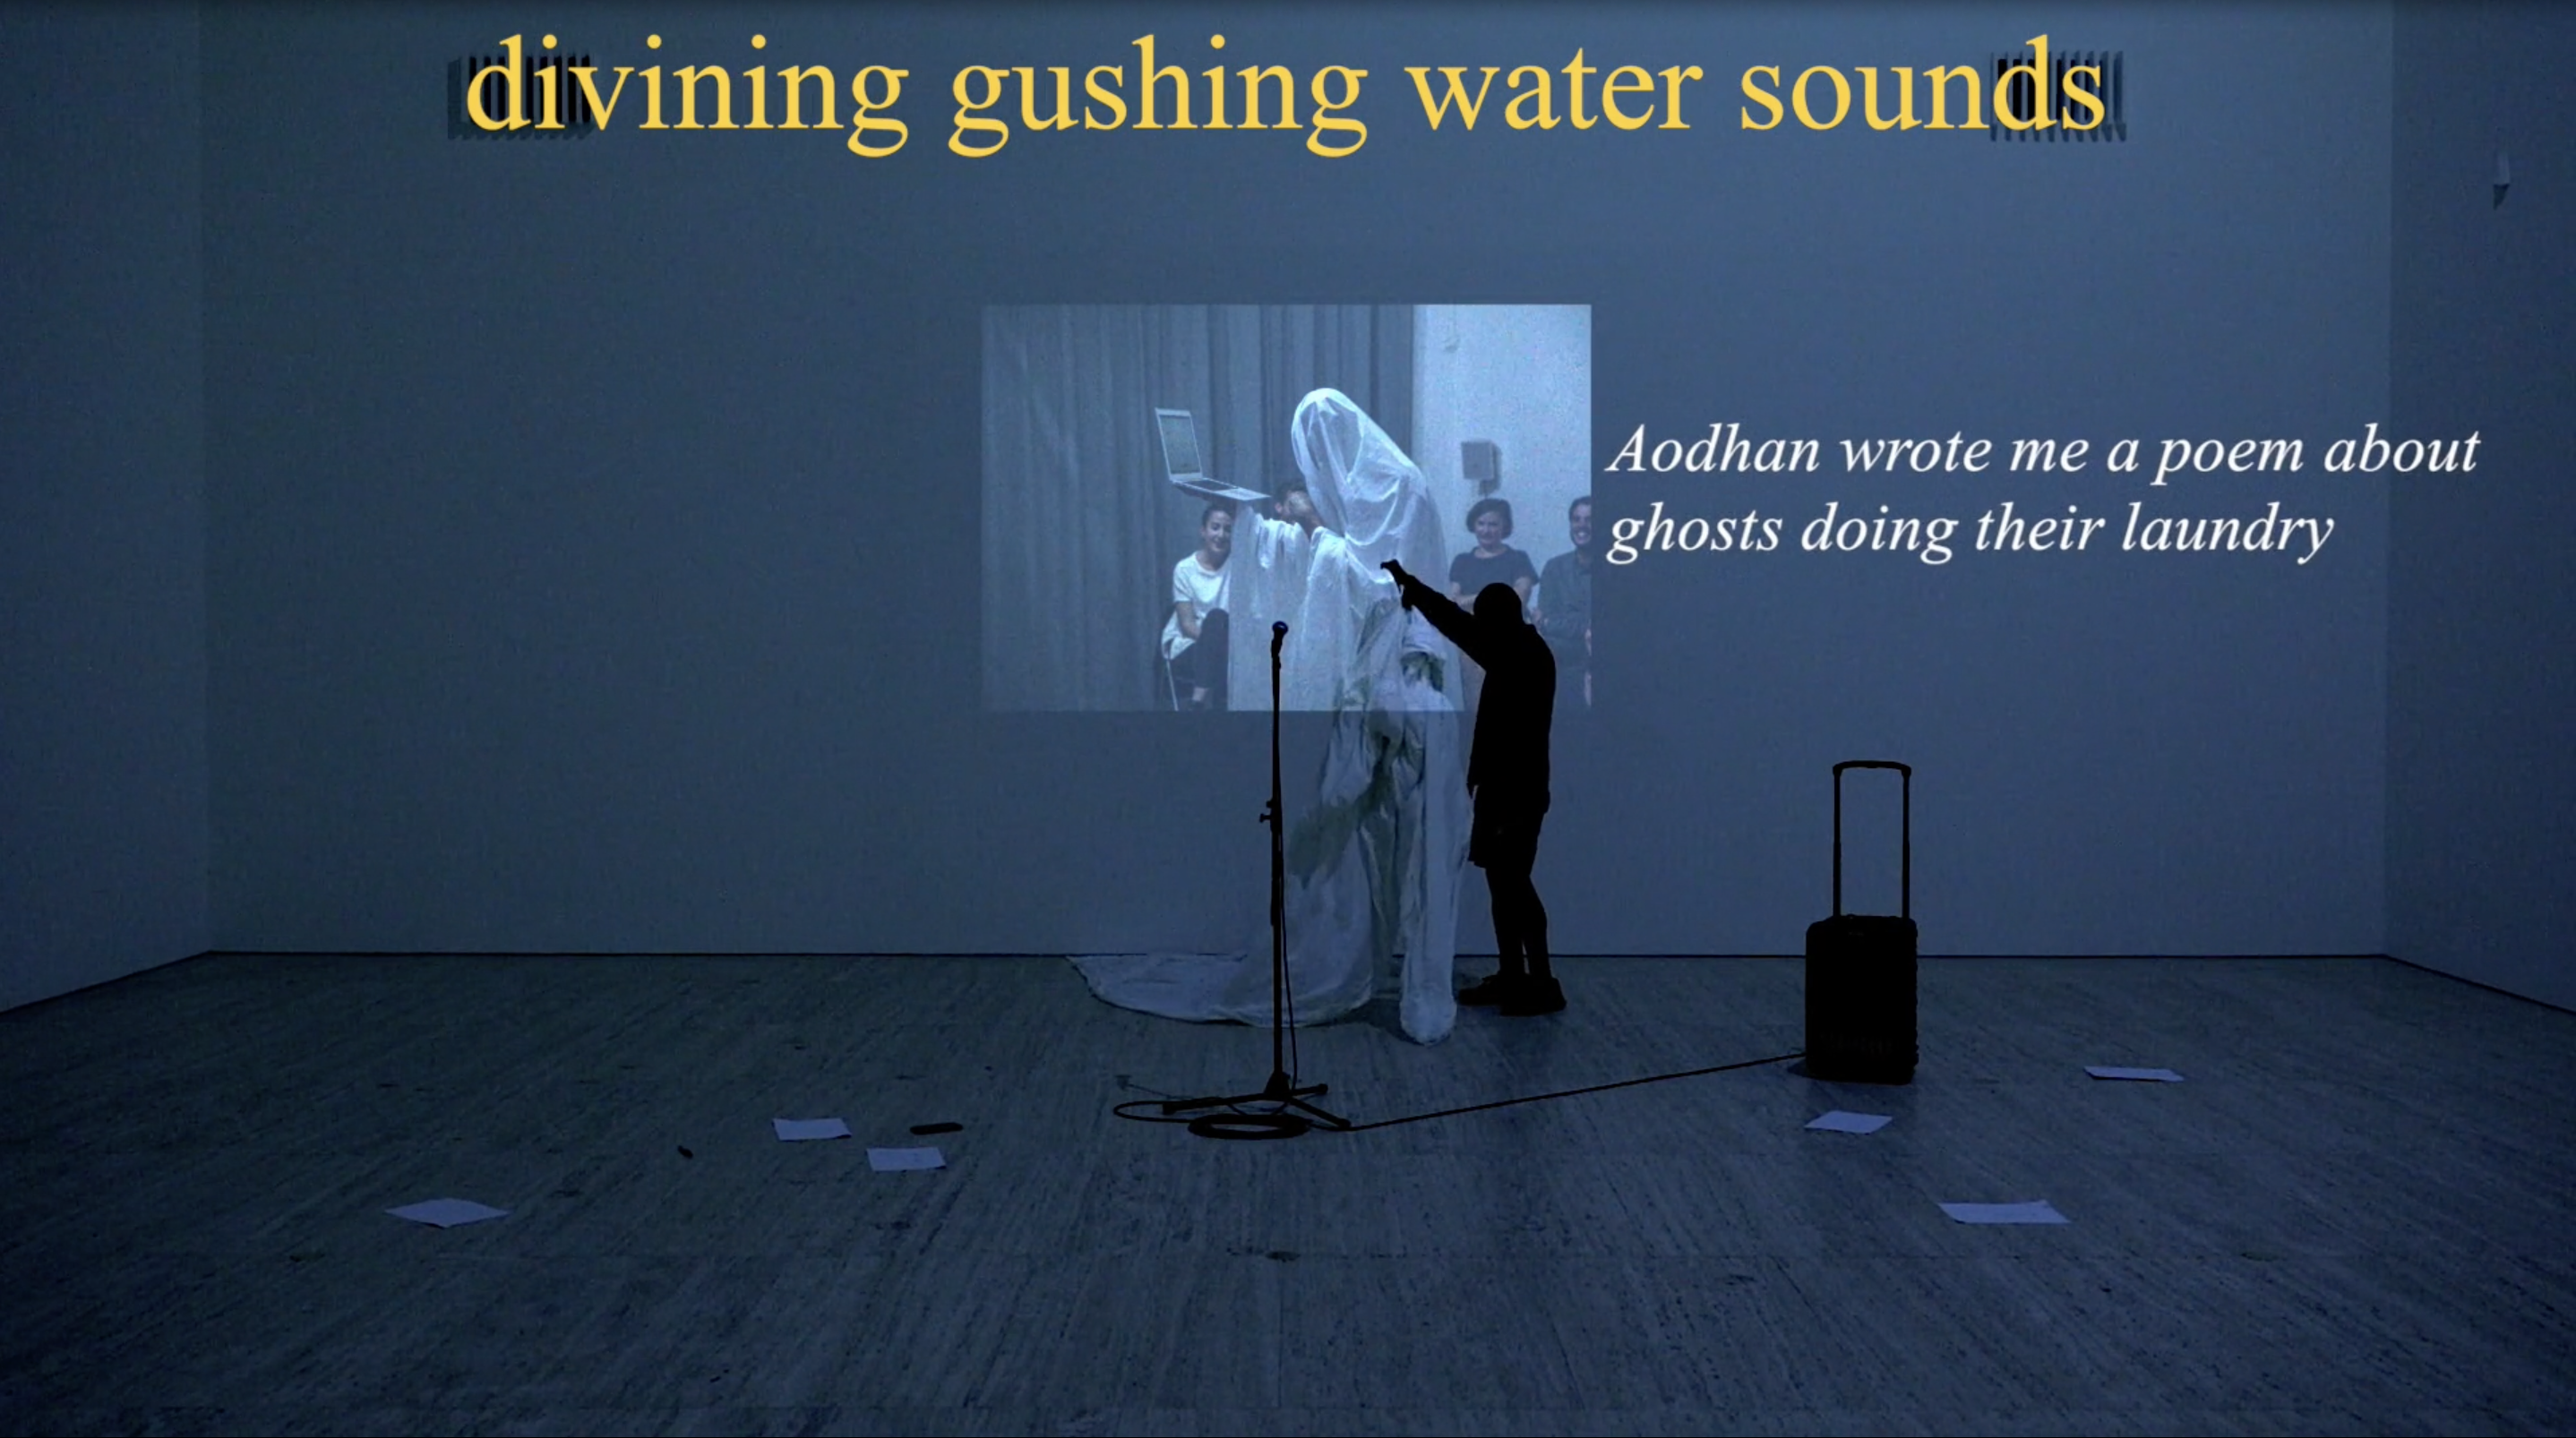 In a dark room with a video projection on the rear wall, Brian Fuata stands near a mic stands and handles a white sheet. Yellow text reading "diving gushing water sounds" appears at the top of the image. To the right of Brian, white, italicized text reads, "Aodhan wrote me a poem about ghosts doing their laundry."